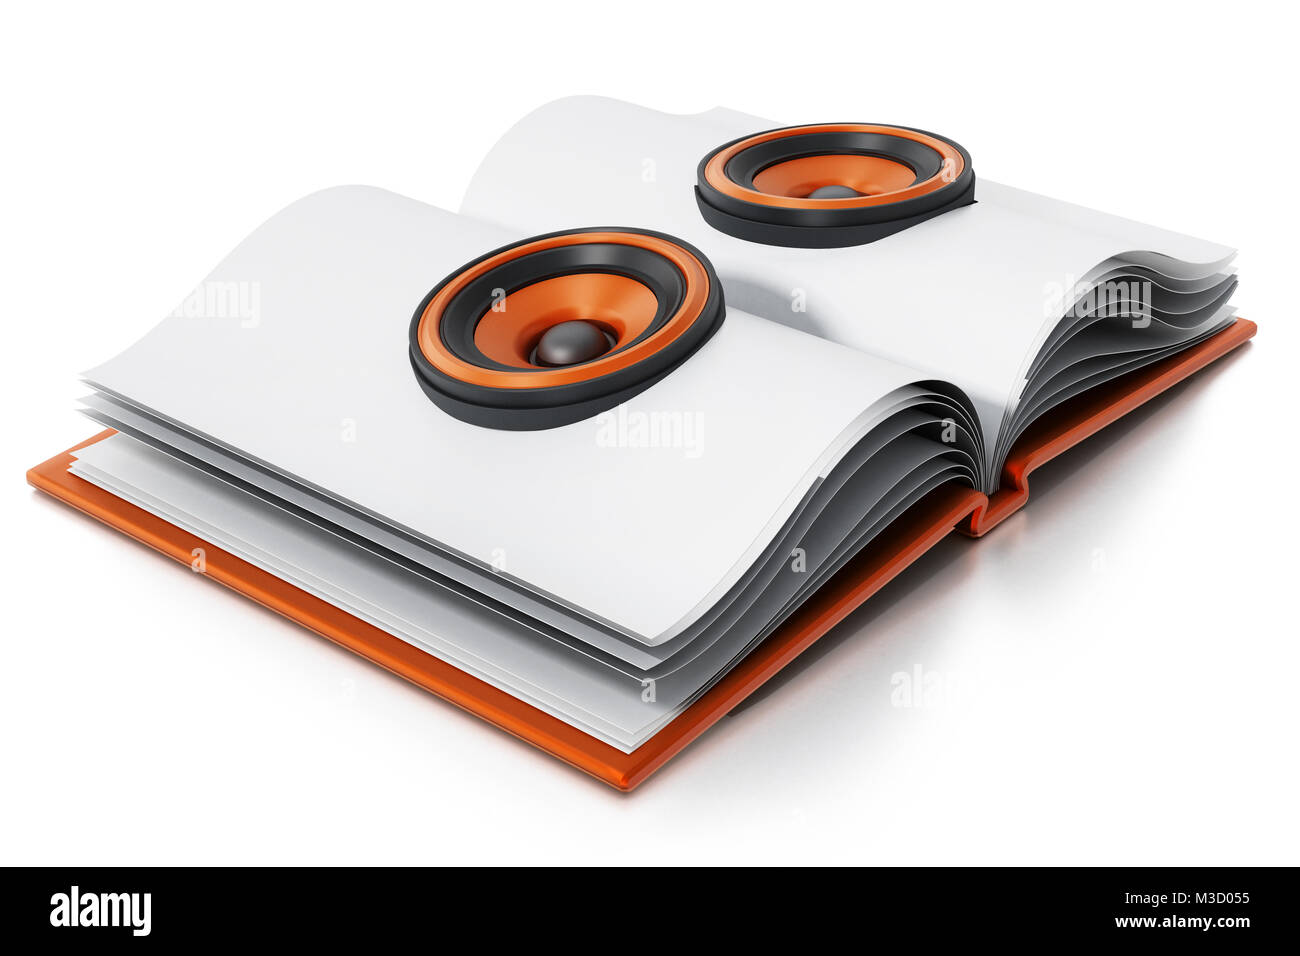 Audio book with speakers on open book. 3D illustration. Stock Photo